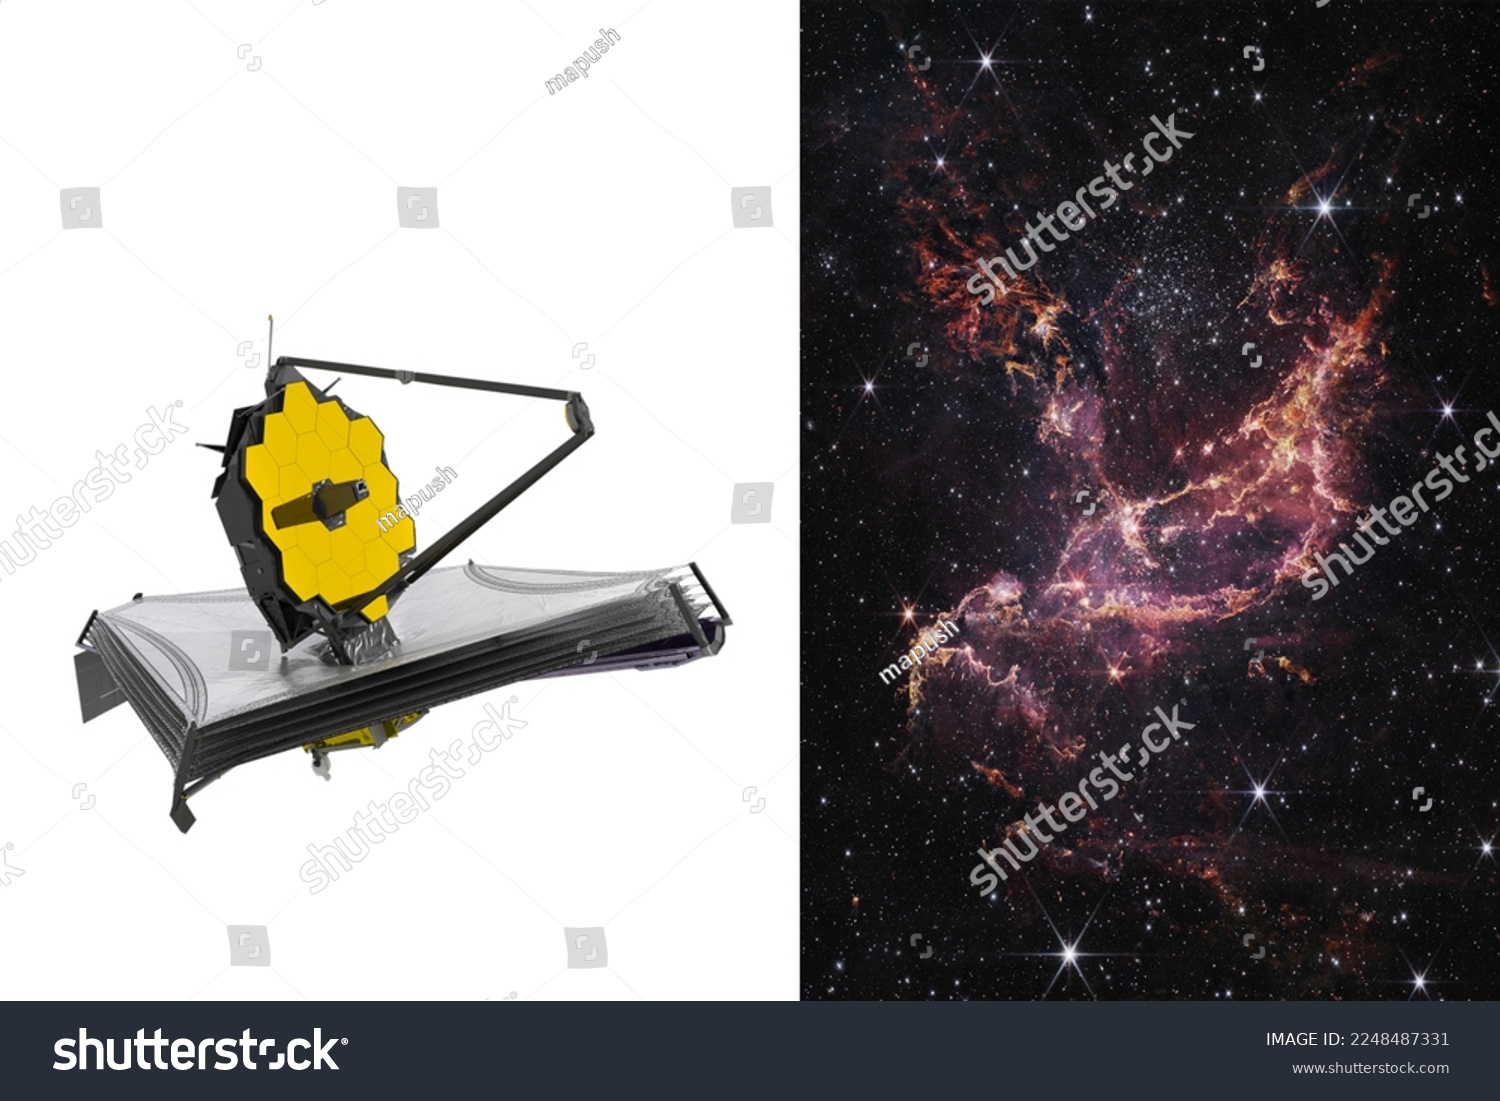 James Webb Space Telescope looking at Star Formation in Cluster’s Dusty Ribbons. Astronomy science. This image elements furnished by NASA. #2248487331